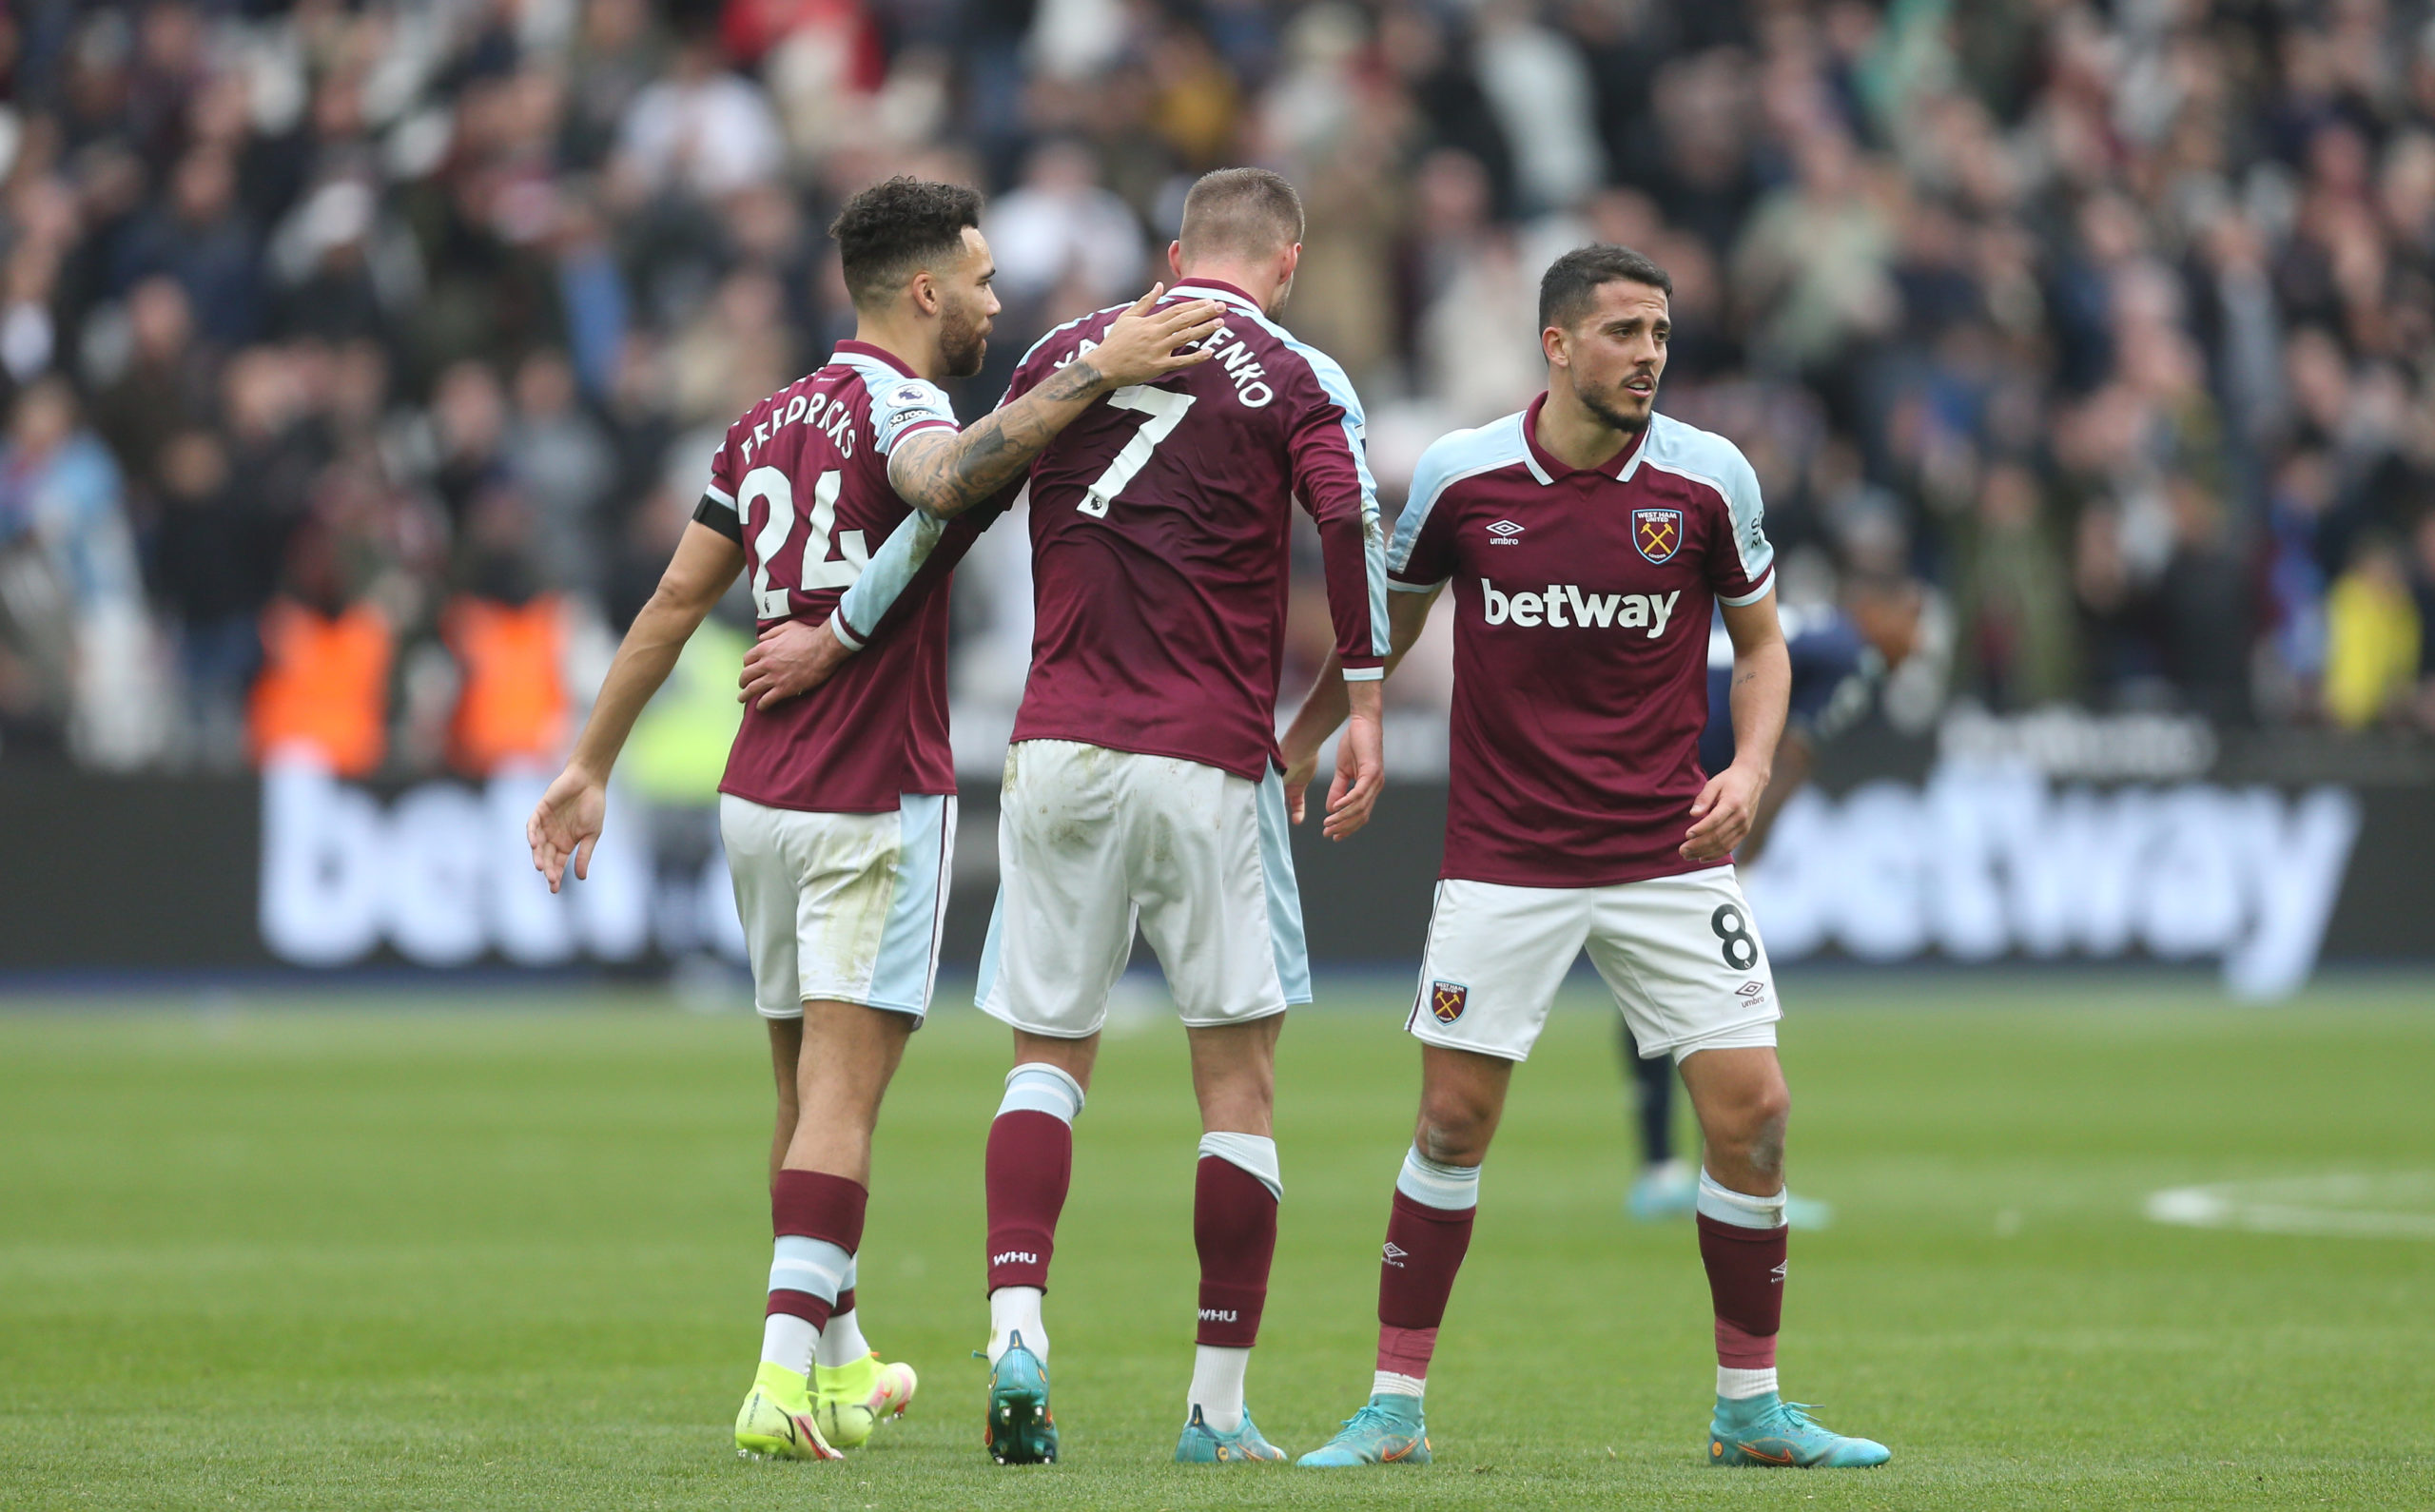 West Ham United ace Pablo Fornals raved about Andriy Yarmolenko after yesterday's win over Aston Villa